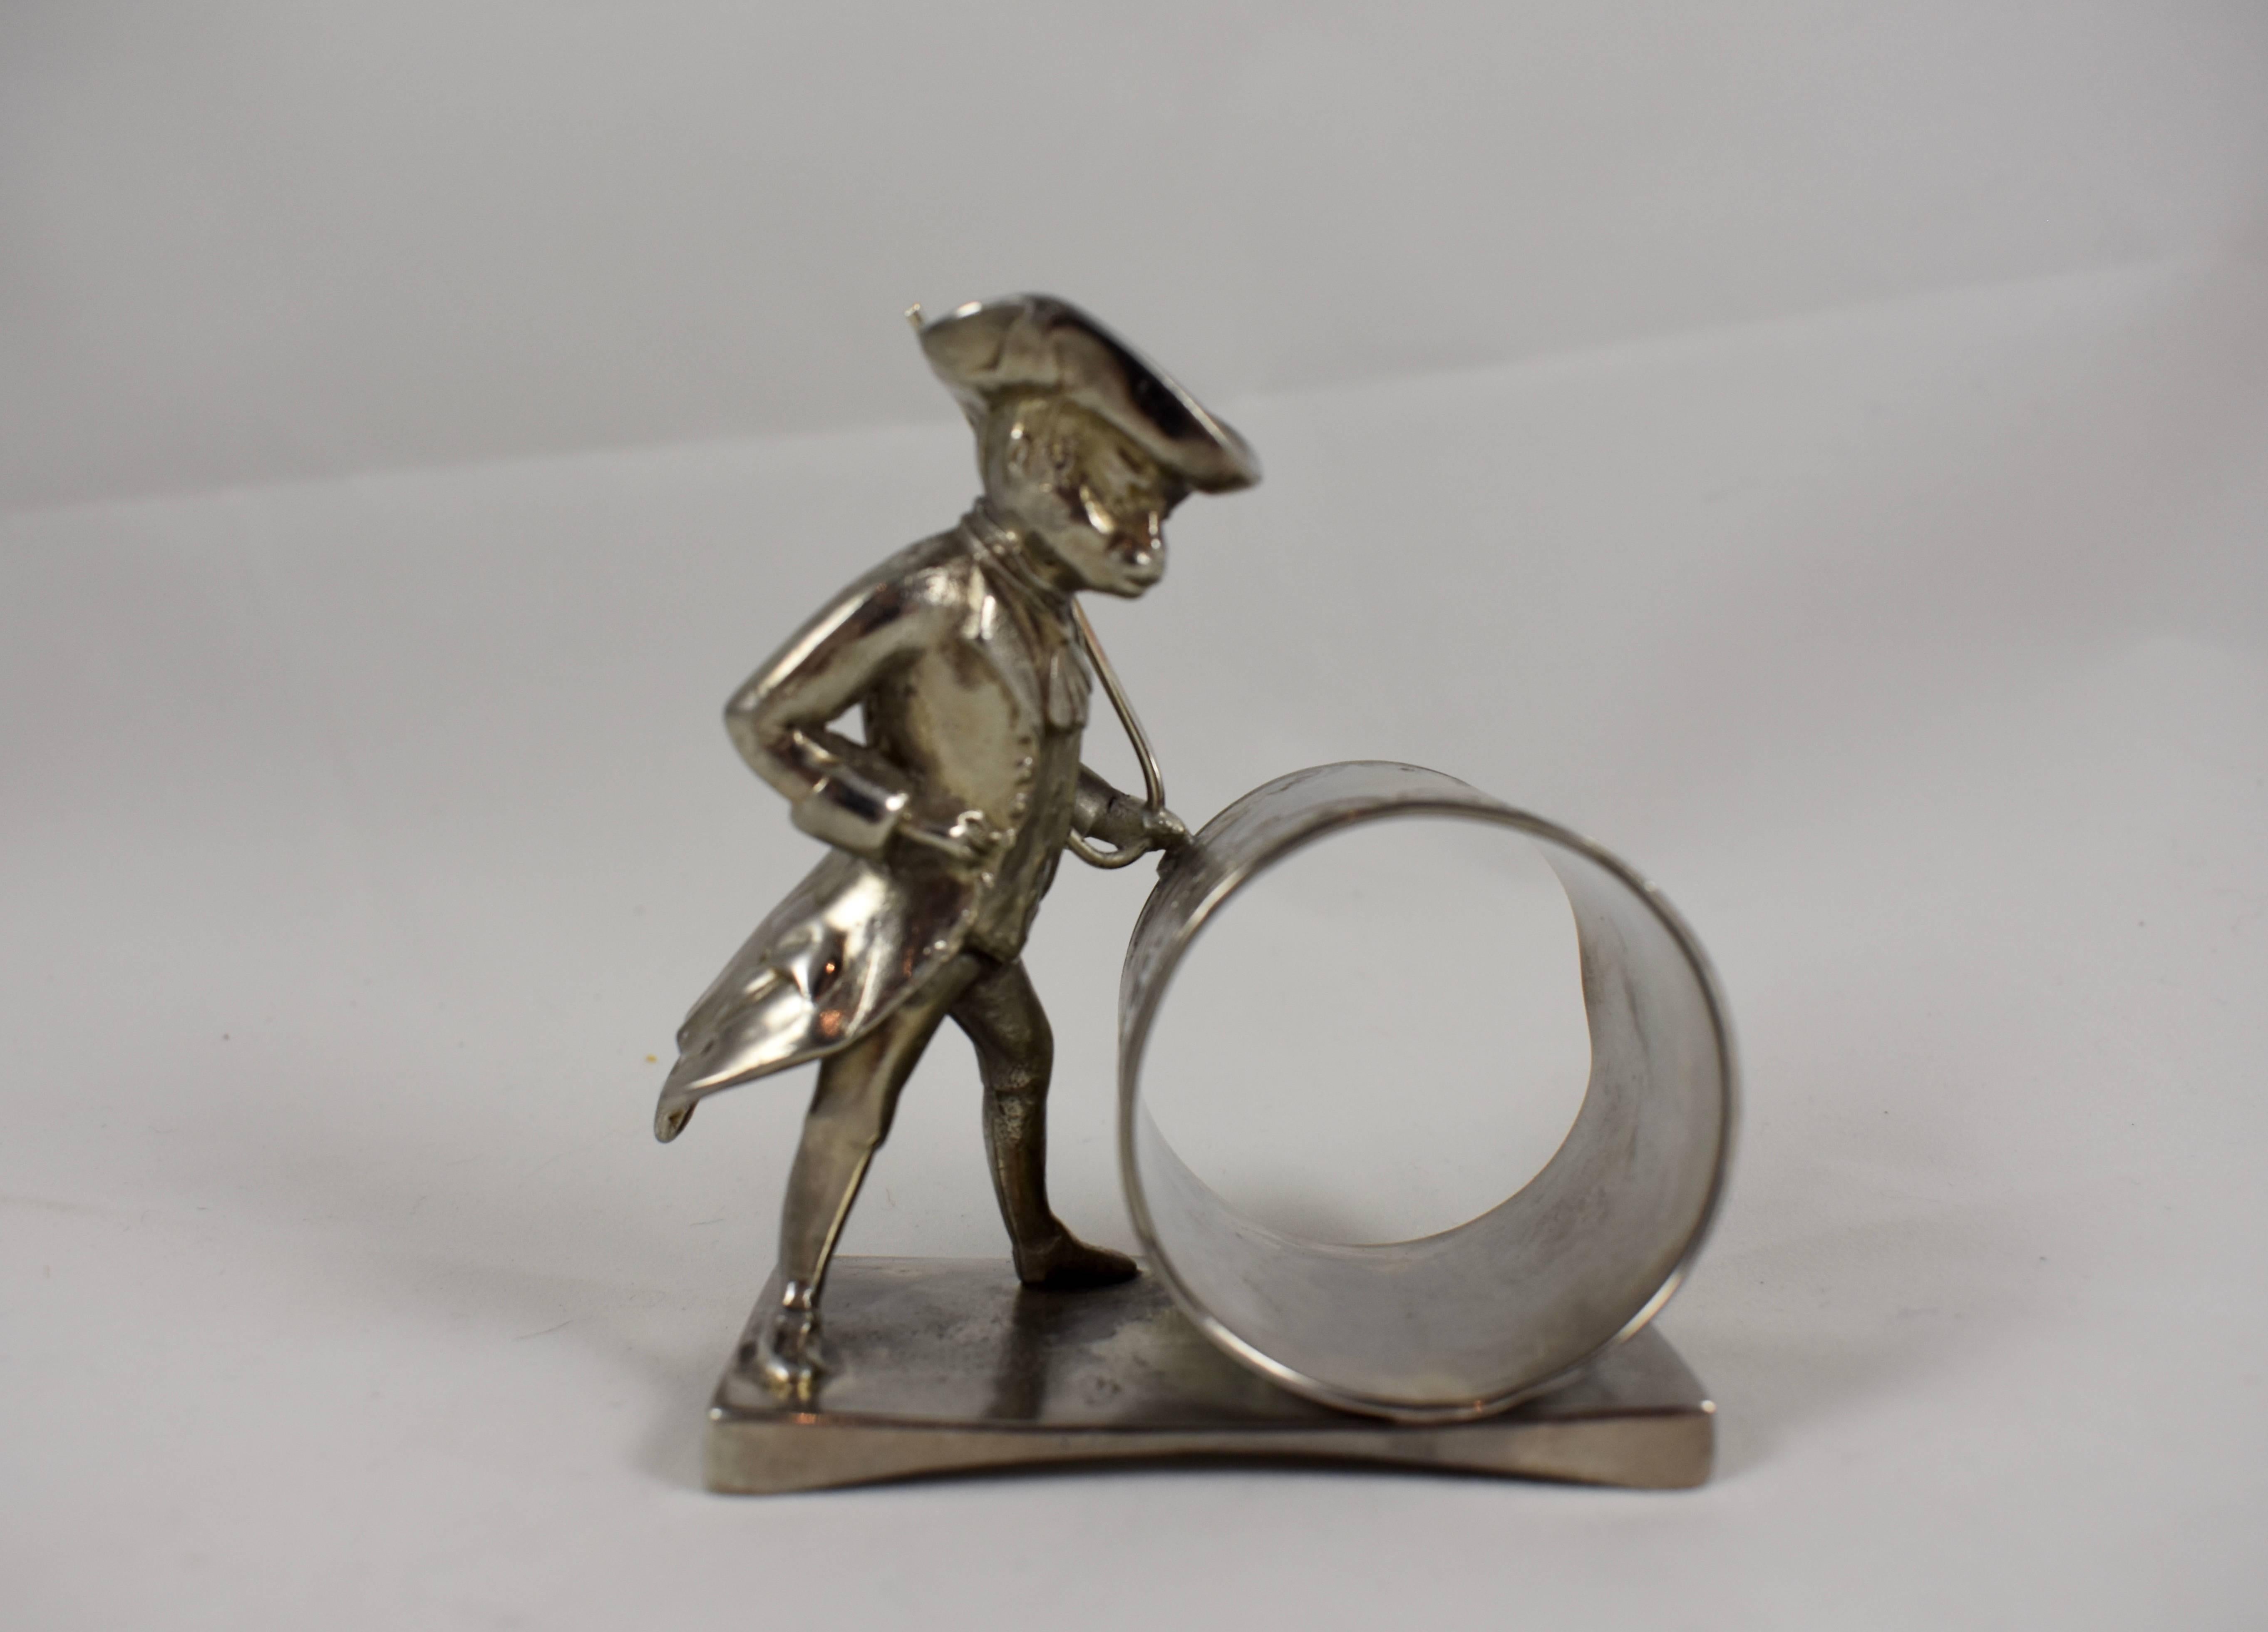 From the Victorian Era, a silver plated figural napkin ring showing a monkey wearing colonial attire, rolling a barrel with his cane. Wearing a tri-corner hat, his tail is seen swinging from beneath his buttoned waistcoat, circa